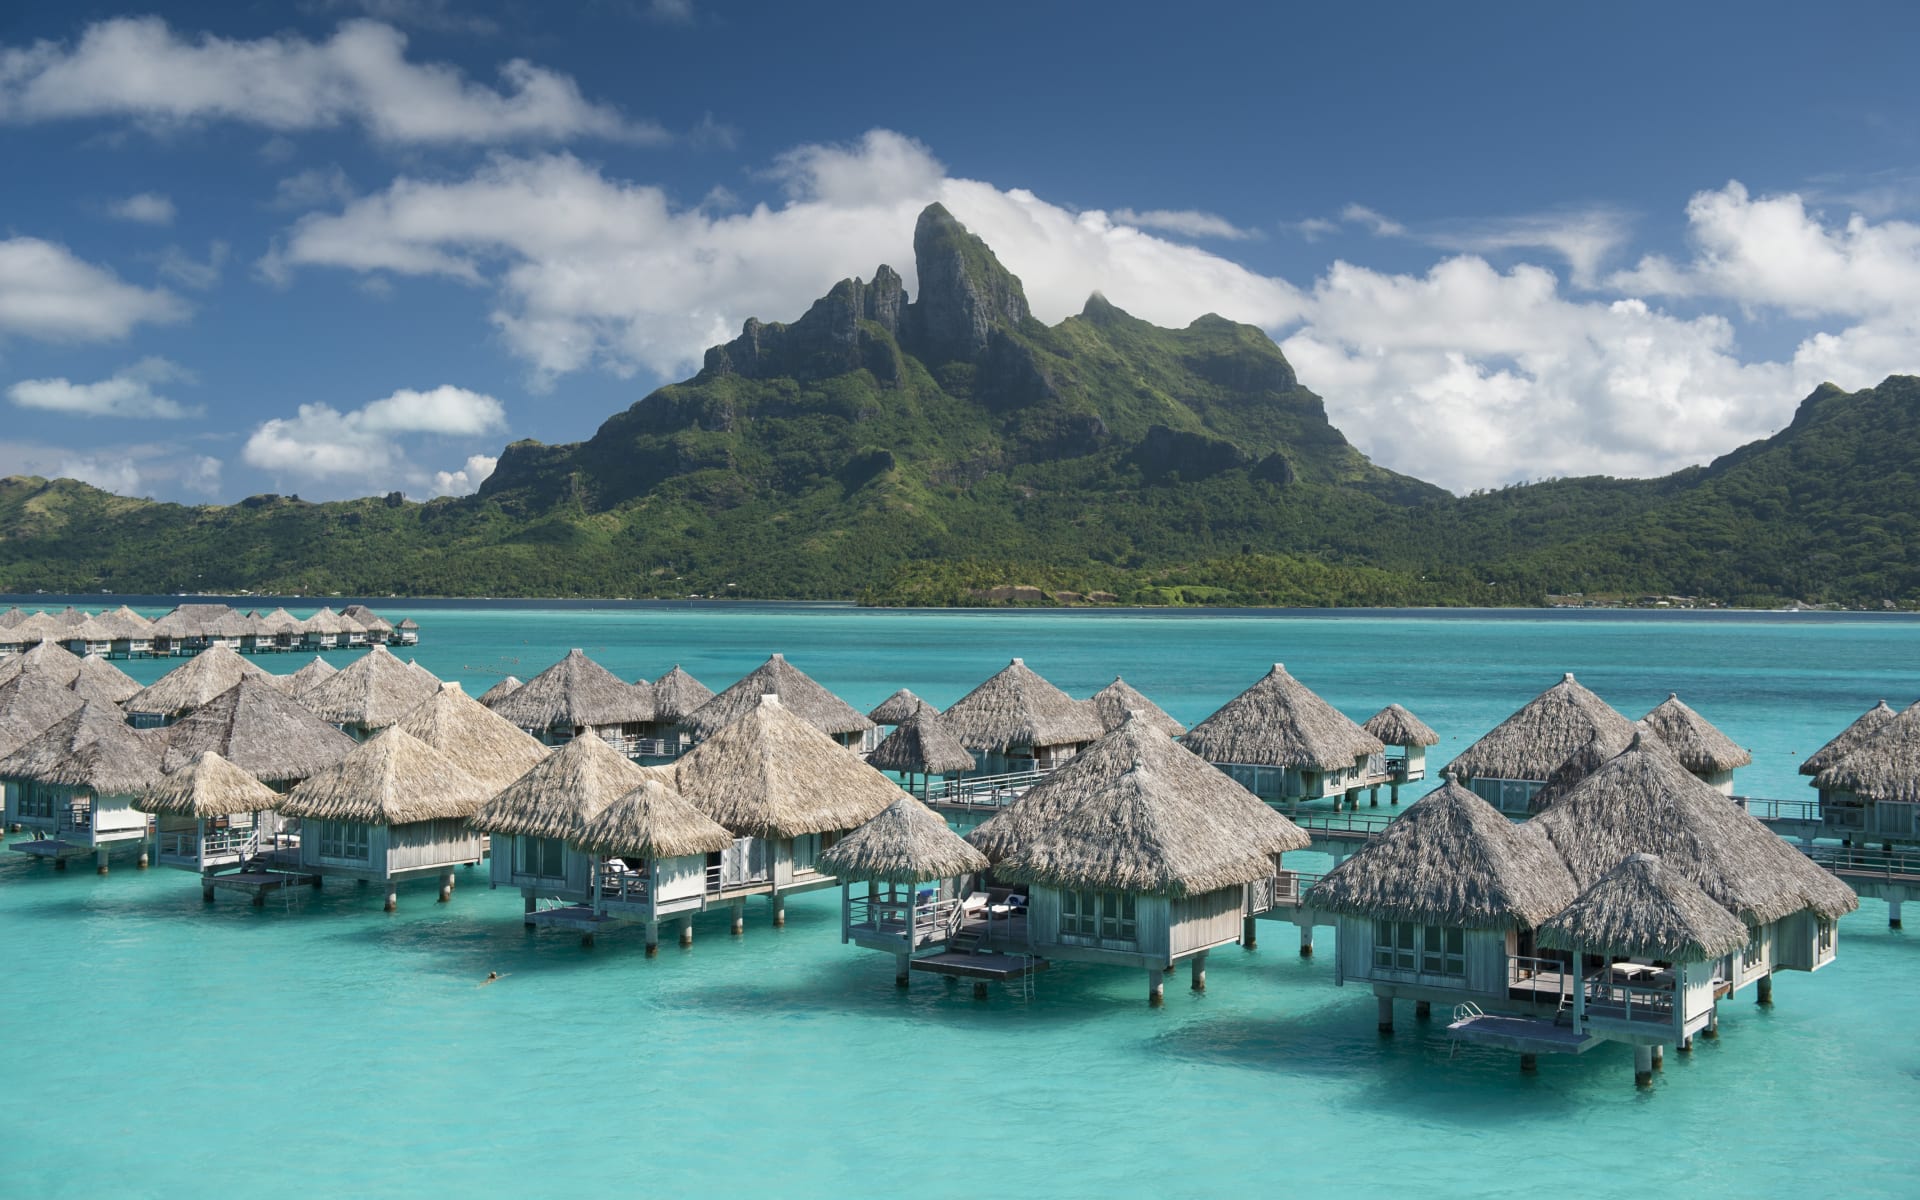 Overwater bungalows with dramatic mountain in the background